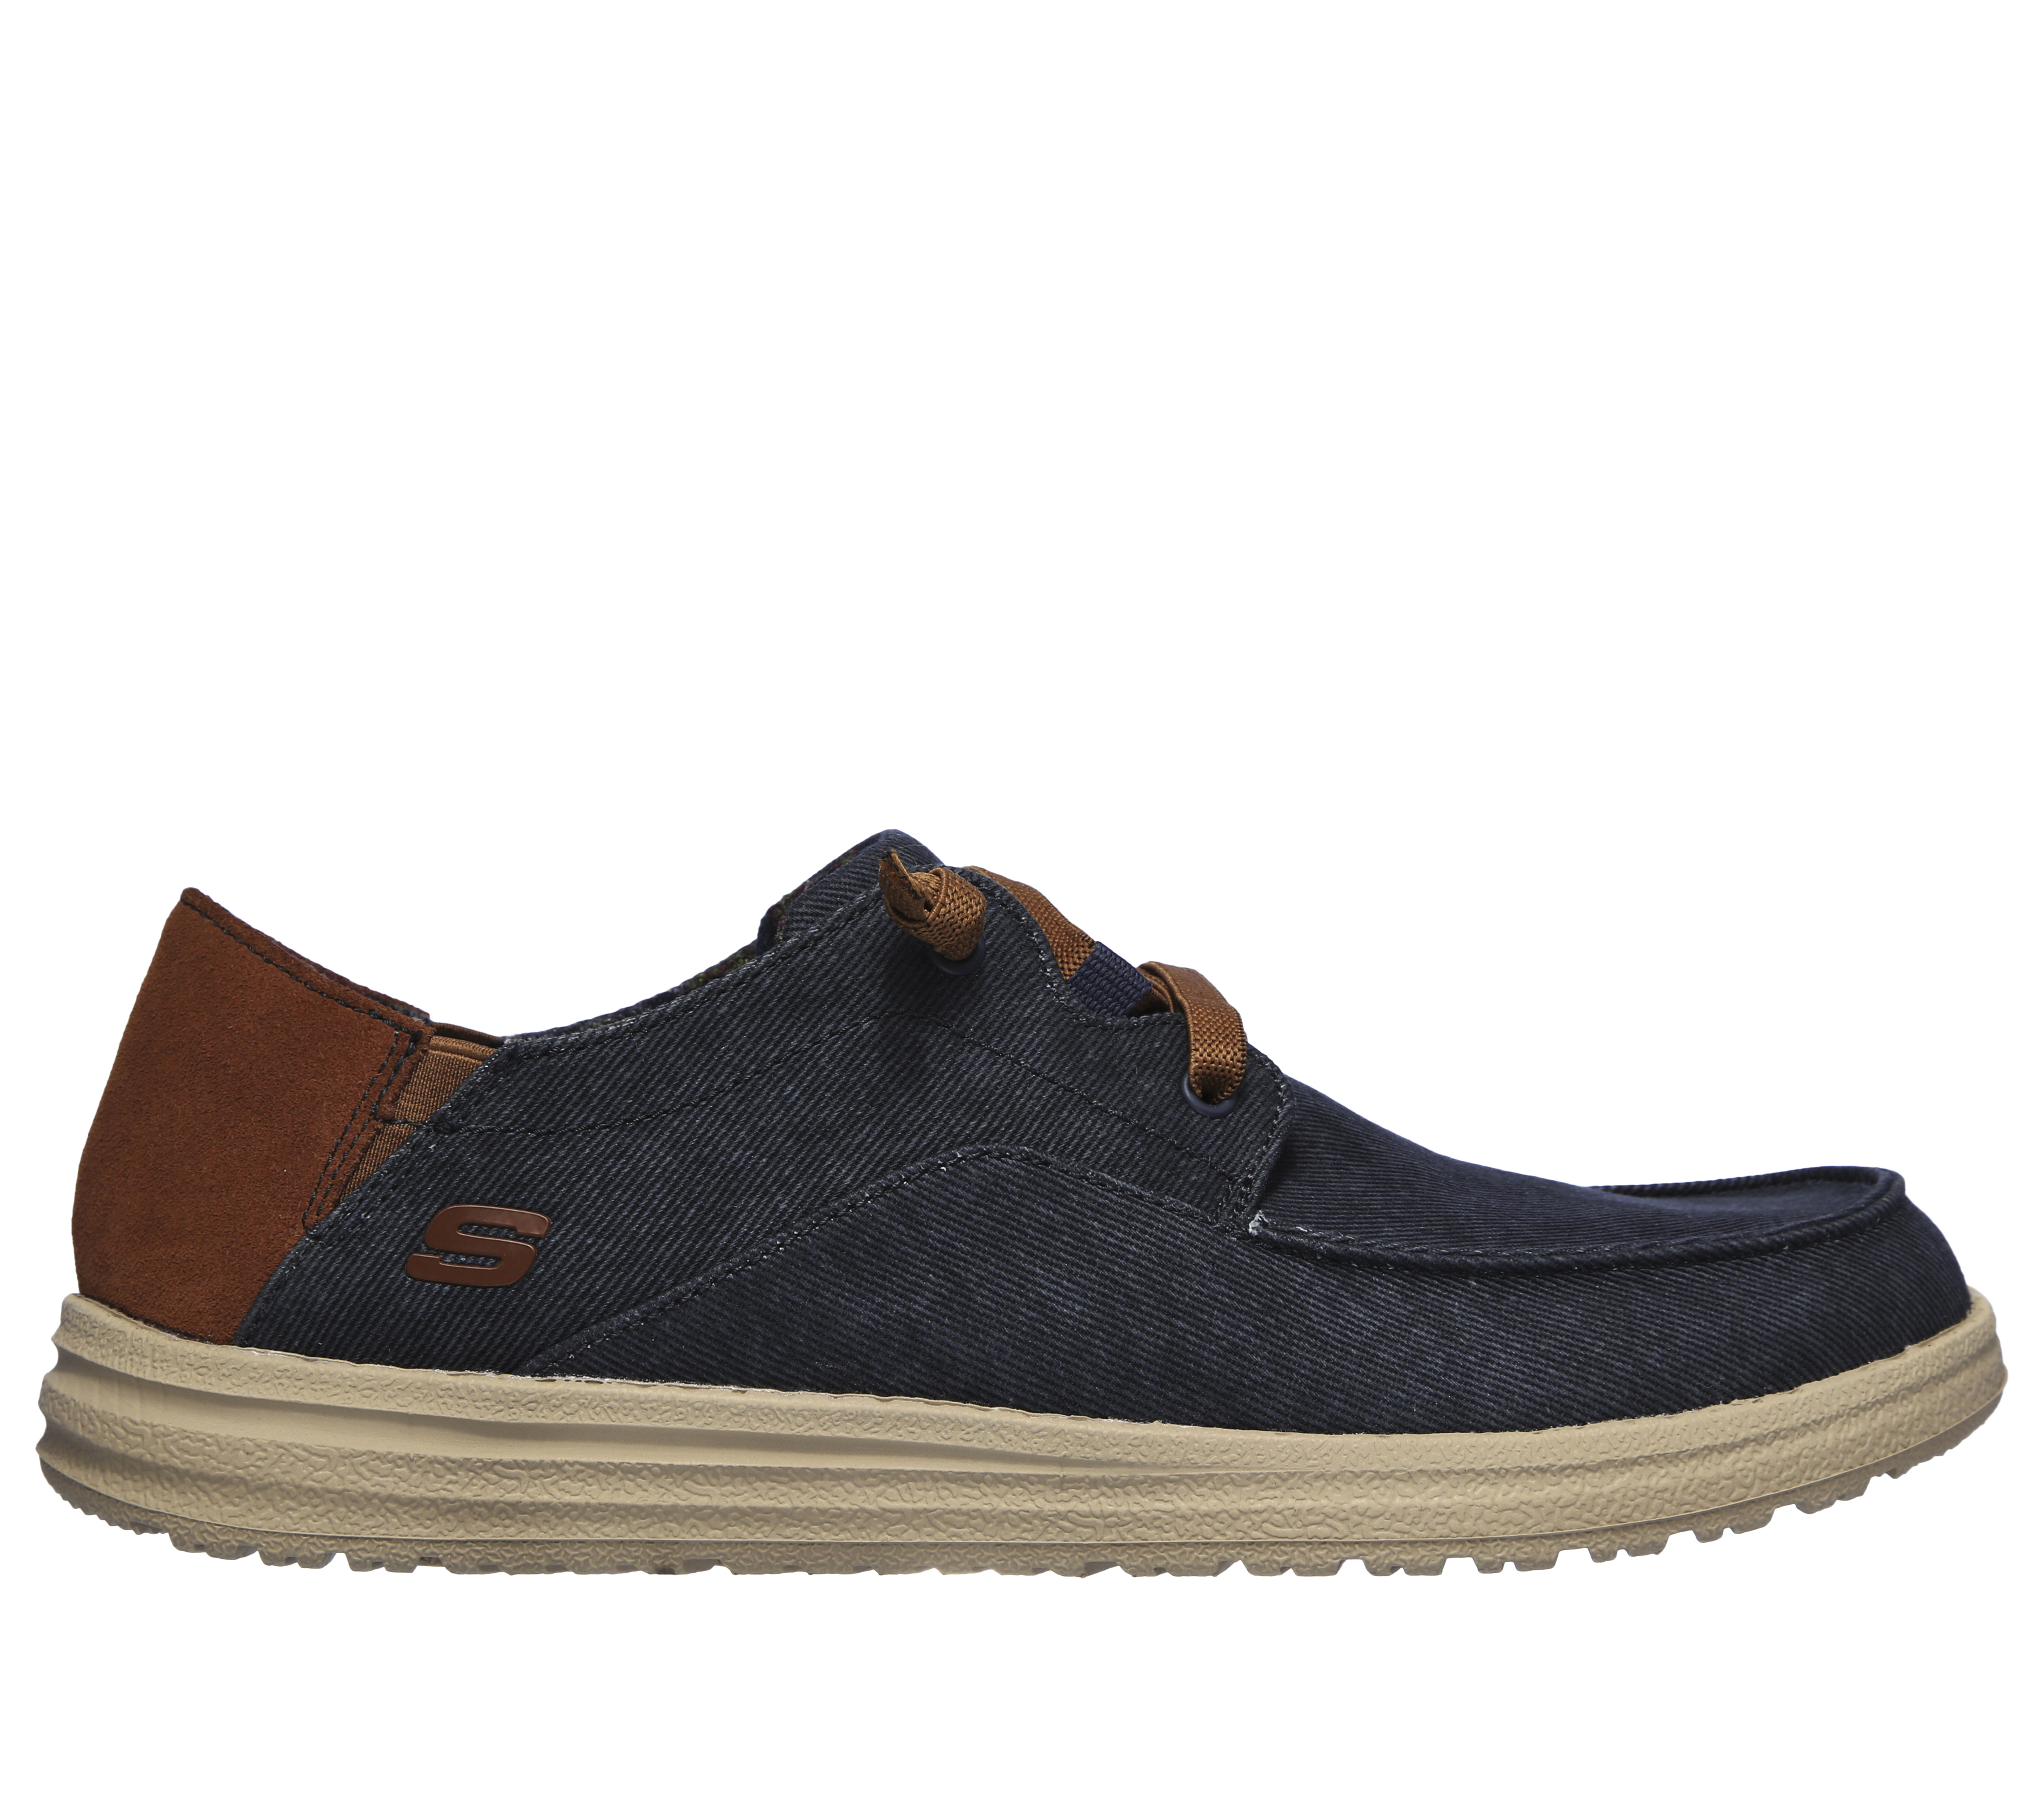 Relaxed - | SKECHERS Melson Fit: Planon